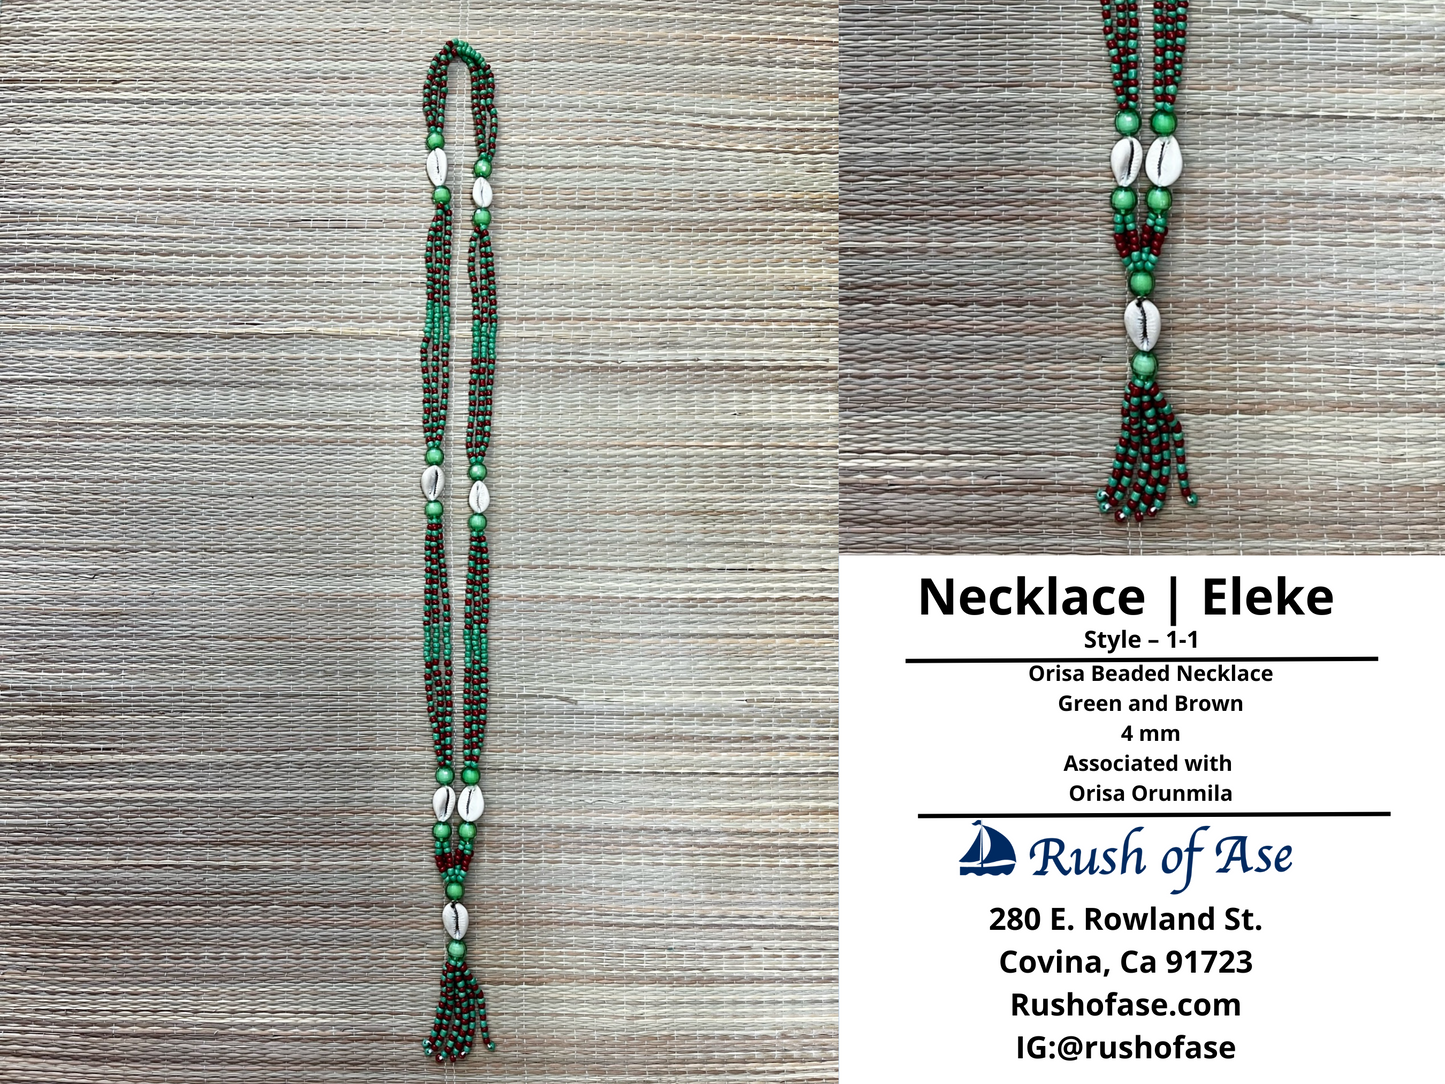 Necklaces | Orisa Multistrand Beaded Necklace with Cowries and Tassel - Green - Brown - 4mm | Orunmila – Style 1-1